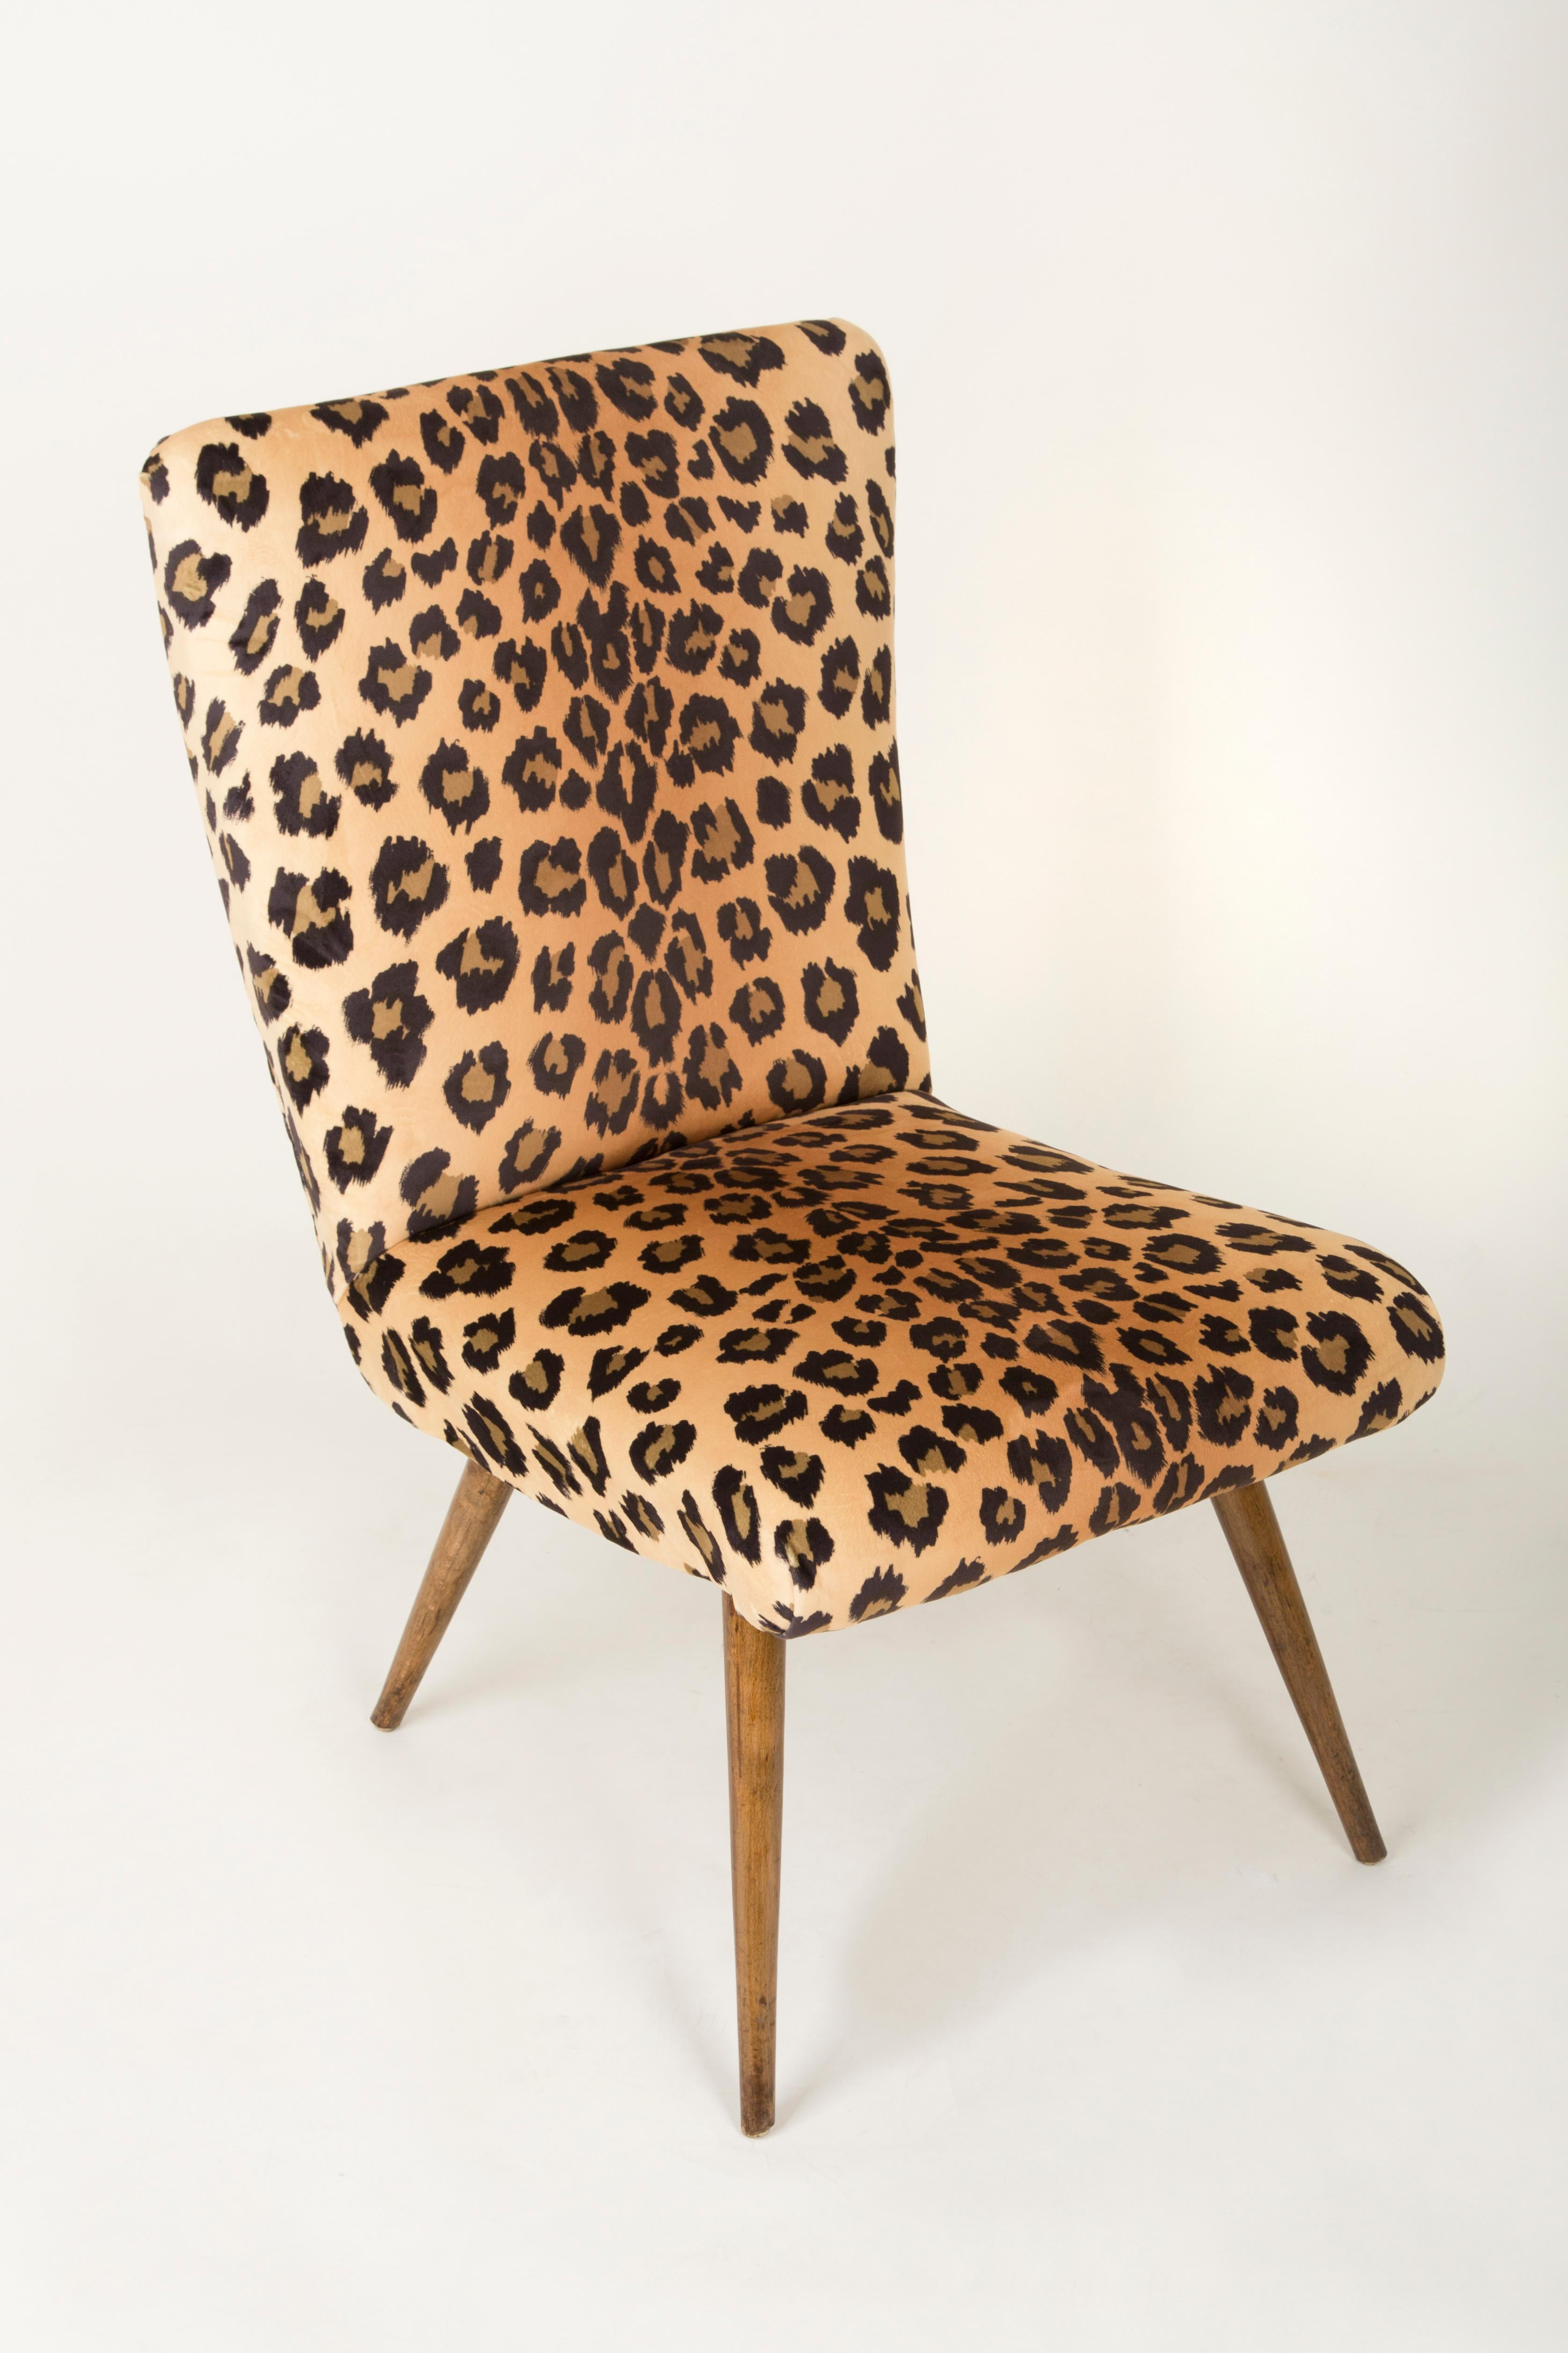 Polish Set of Two Mid-Century Modern Leopard Print Chairs, 1960s, Germany